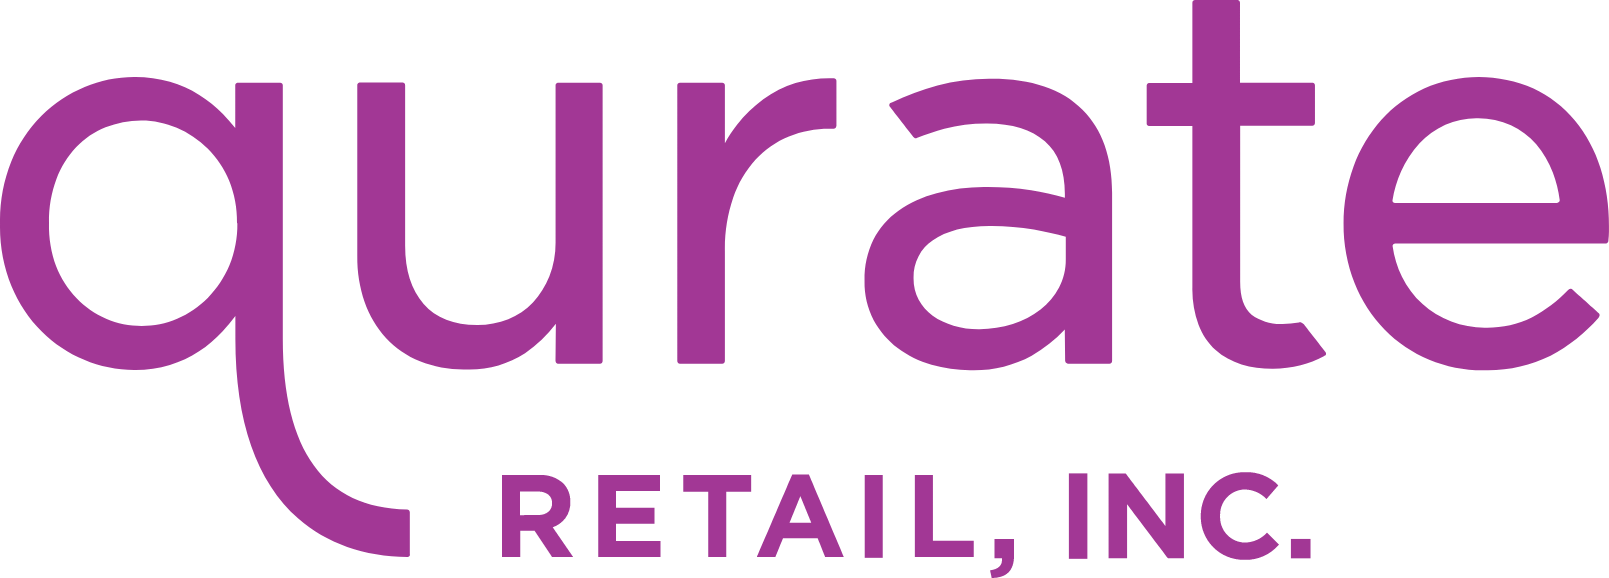 Qurate Retail Group logo large (transparent PNG)